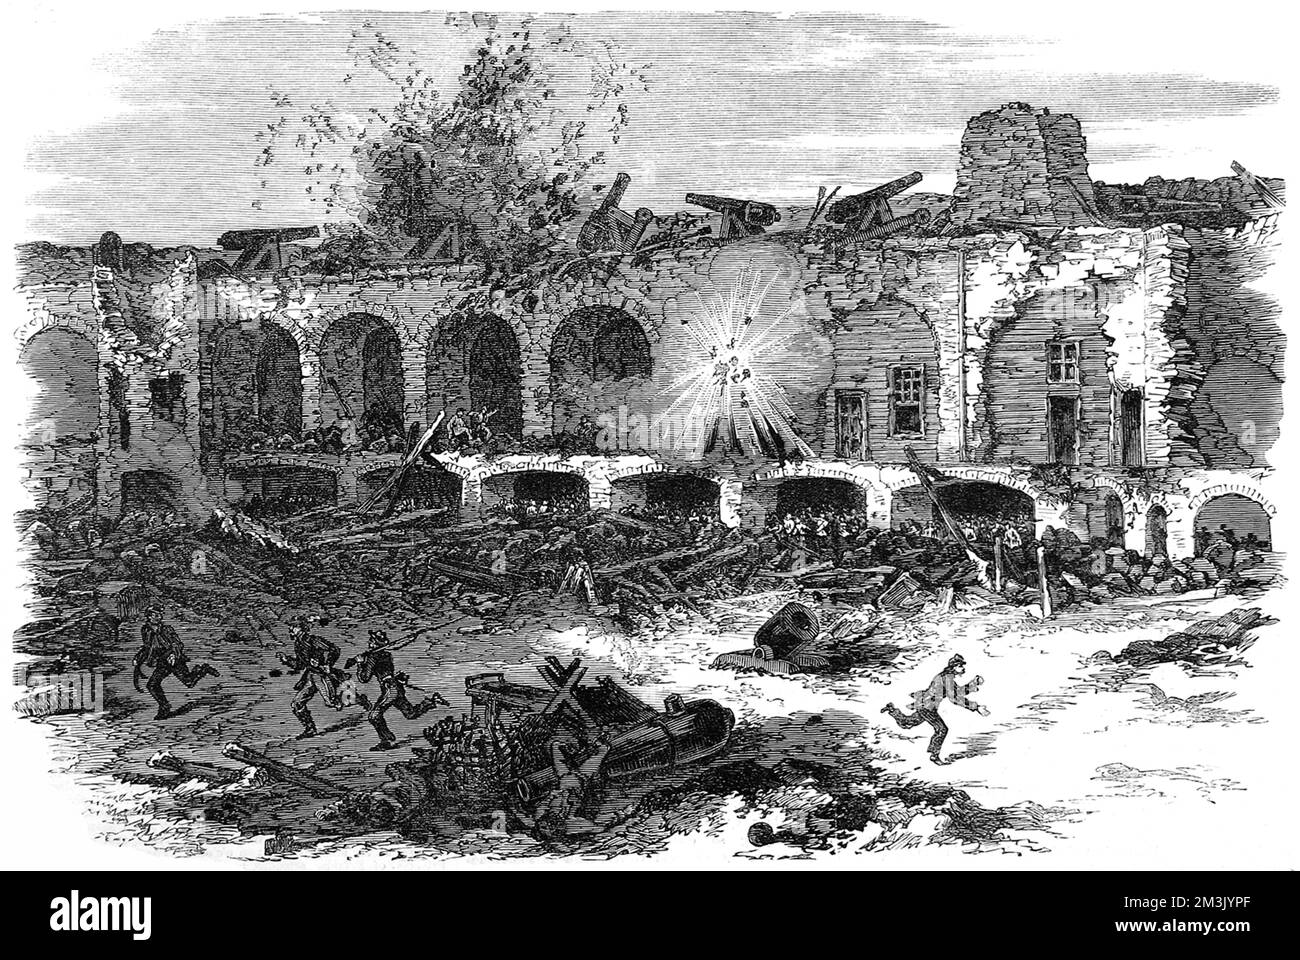 The interior of Fort Sumter, Charleston Harbour, after a continuous bombardment by the Federal batteries on Morr's Island.  Fort Sumter provided the first engagement of the civil War and its ownership was hotly contested by the Federals and the Confederates throughout.     Date: 1863 Stock Photo